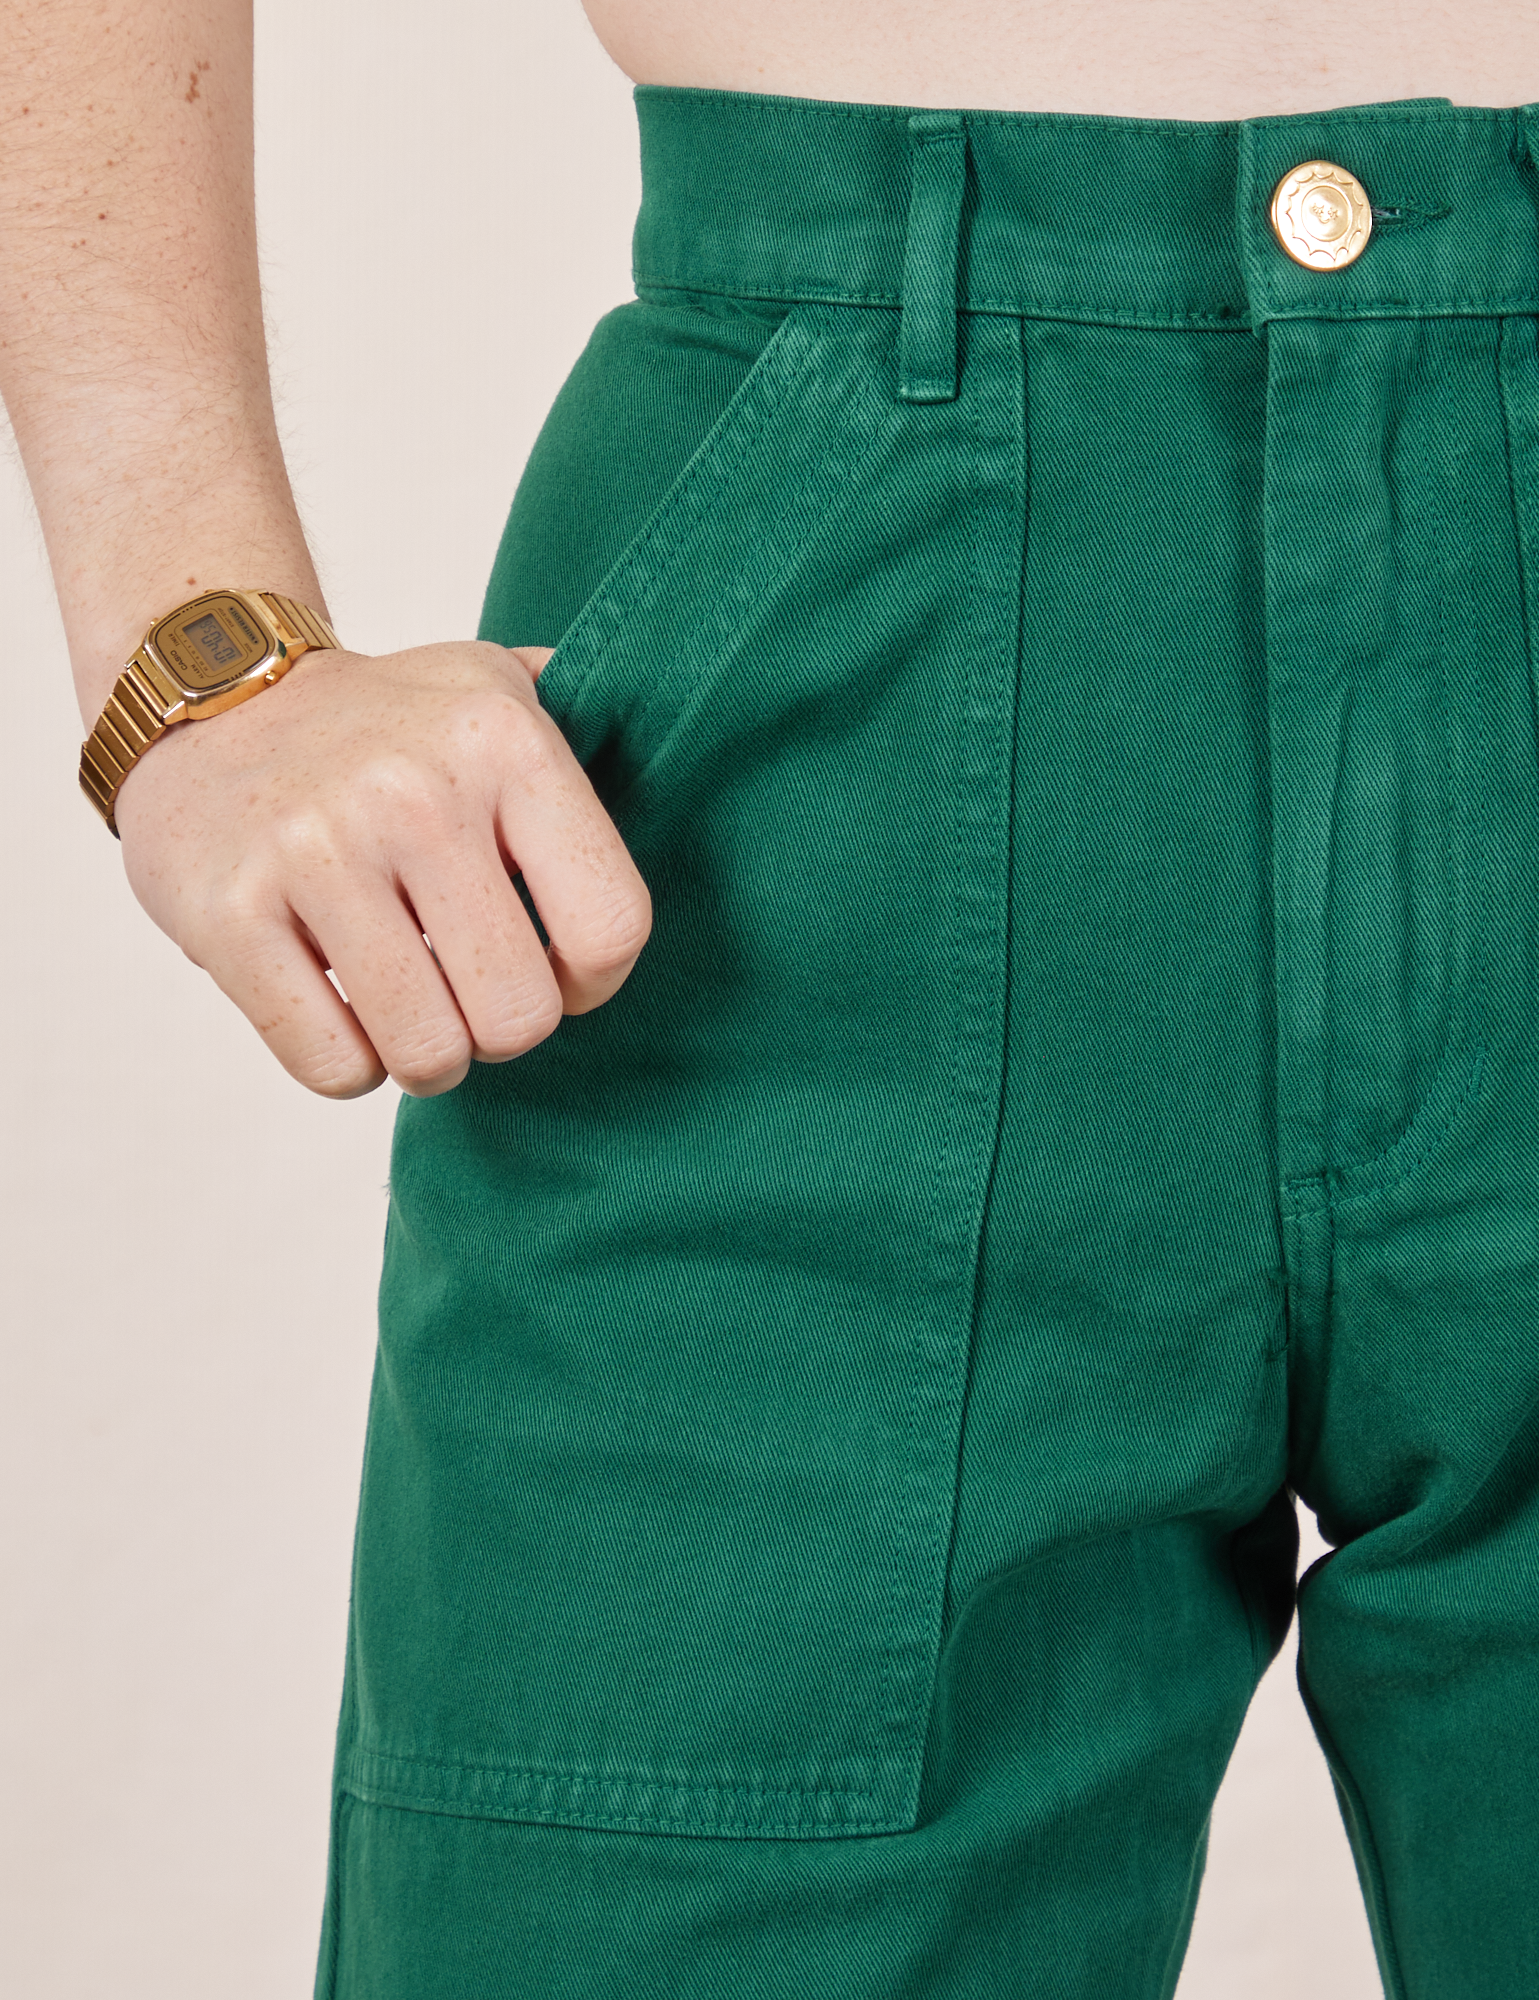 Front pocket close up of Work Pants in Hunter Green. Hana has her hand in the pocket